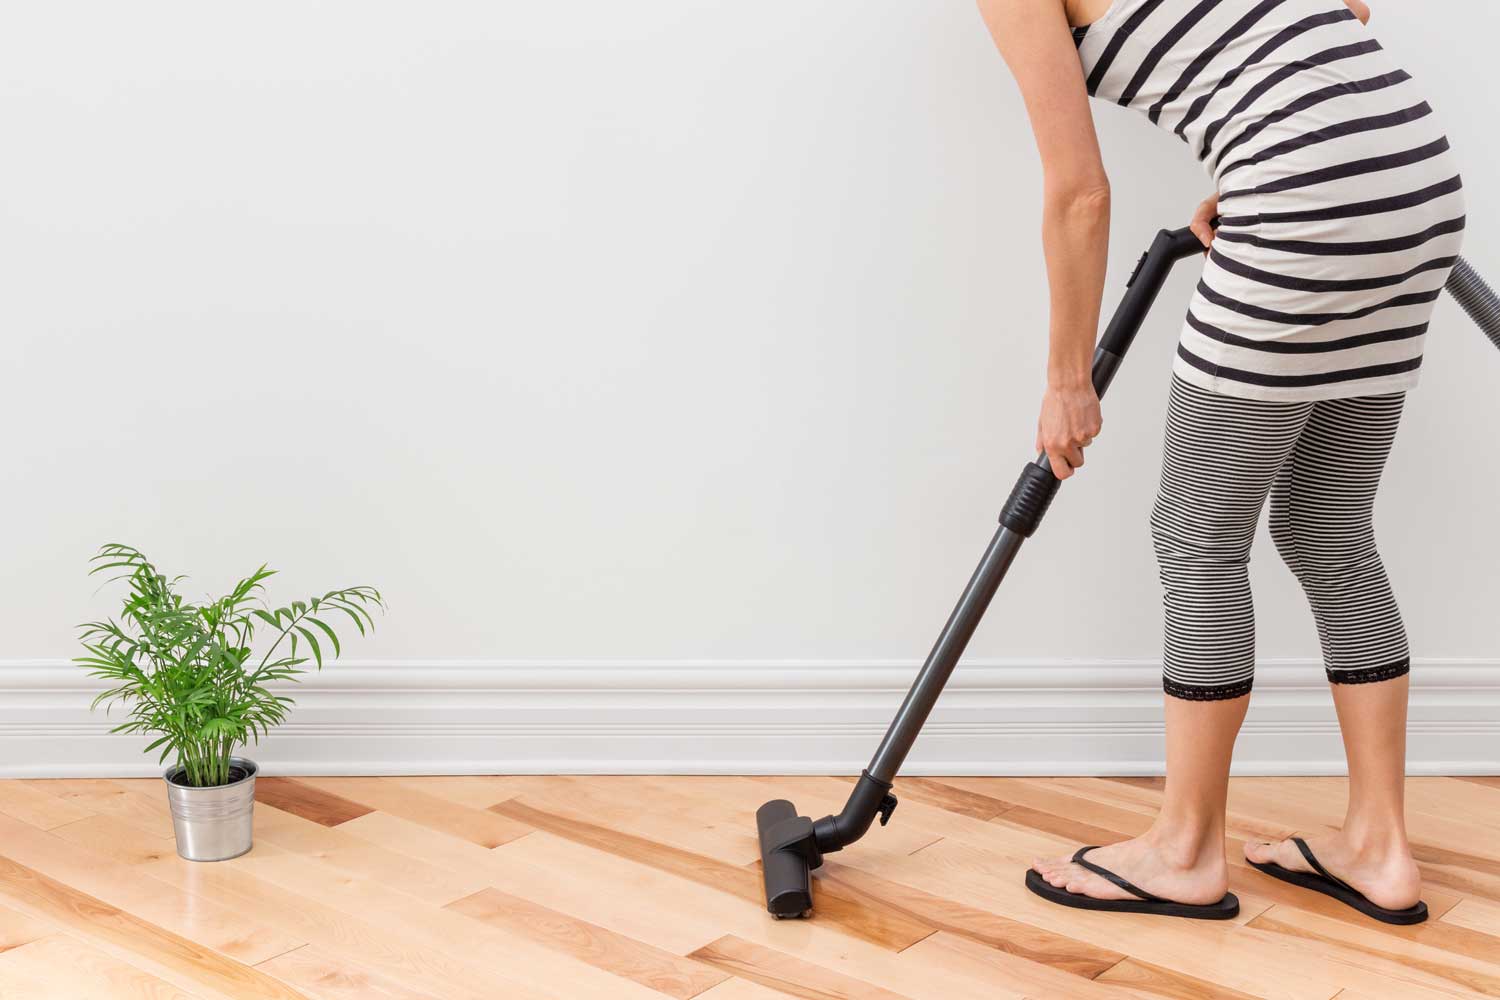 Regulary vacuum or sweep floors to remove dirt and keep your home floors looking amazing - tips from Footprints Floors in Castle Rock / Parker.